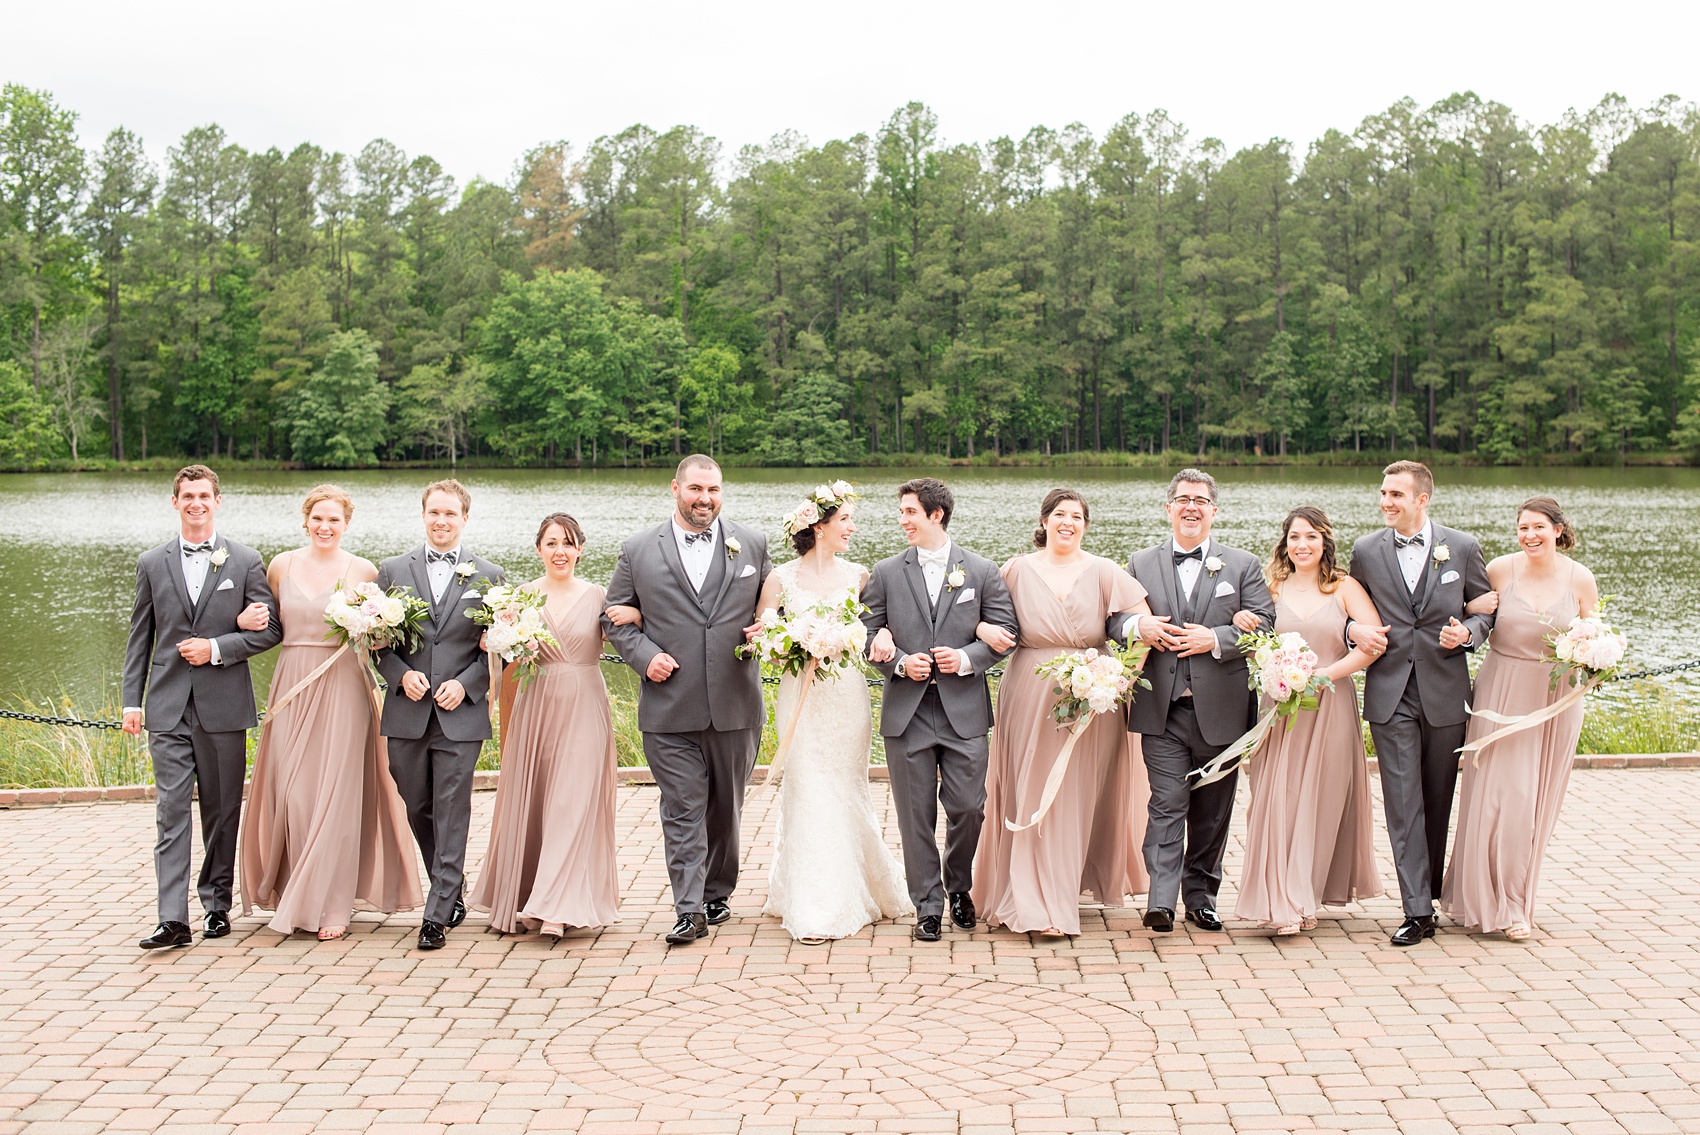 Pavilion at Angus Barn wedding photos by Mikkel Paige Photography. Creative picture of the bridal party walking towards the camera with the bridesmaids in dusty rose mismatched chiffon Jenny Yoo gowns and the groomsmen in grey suits.